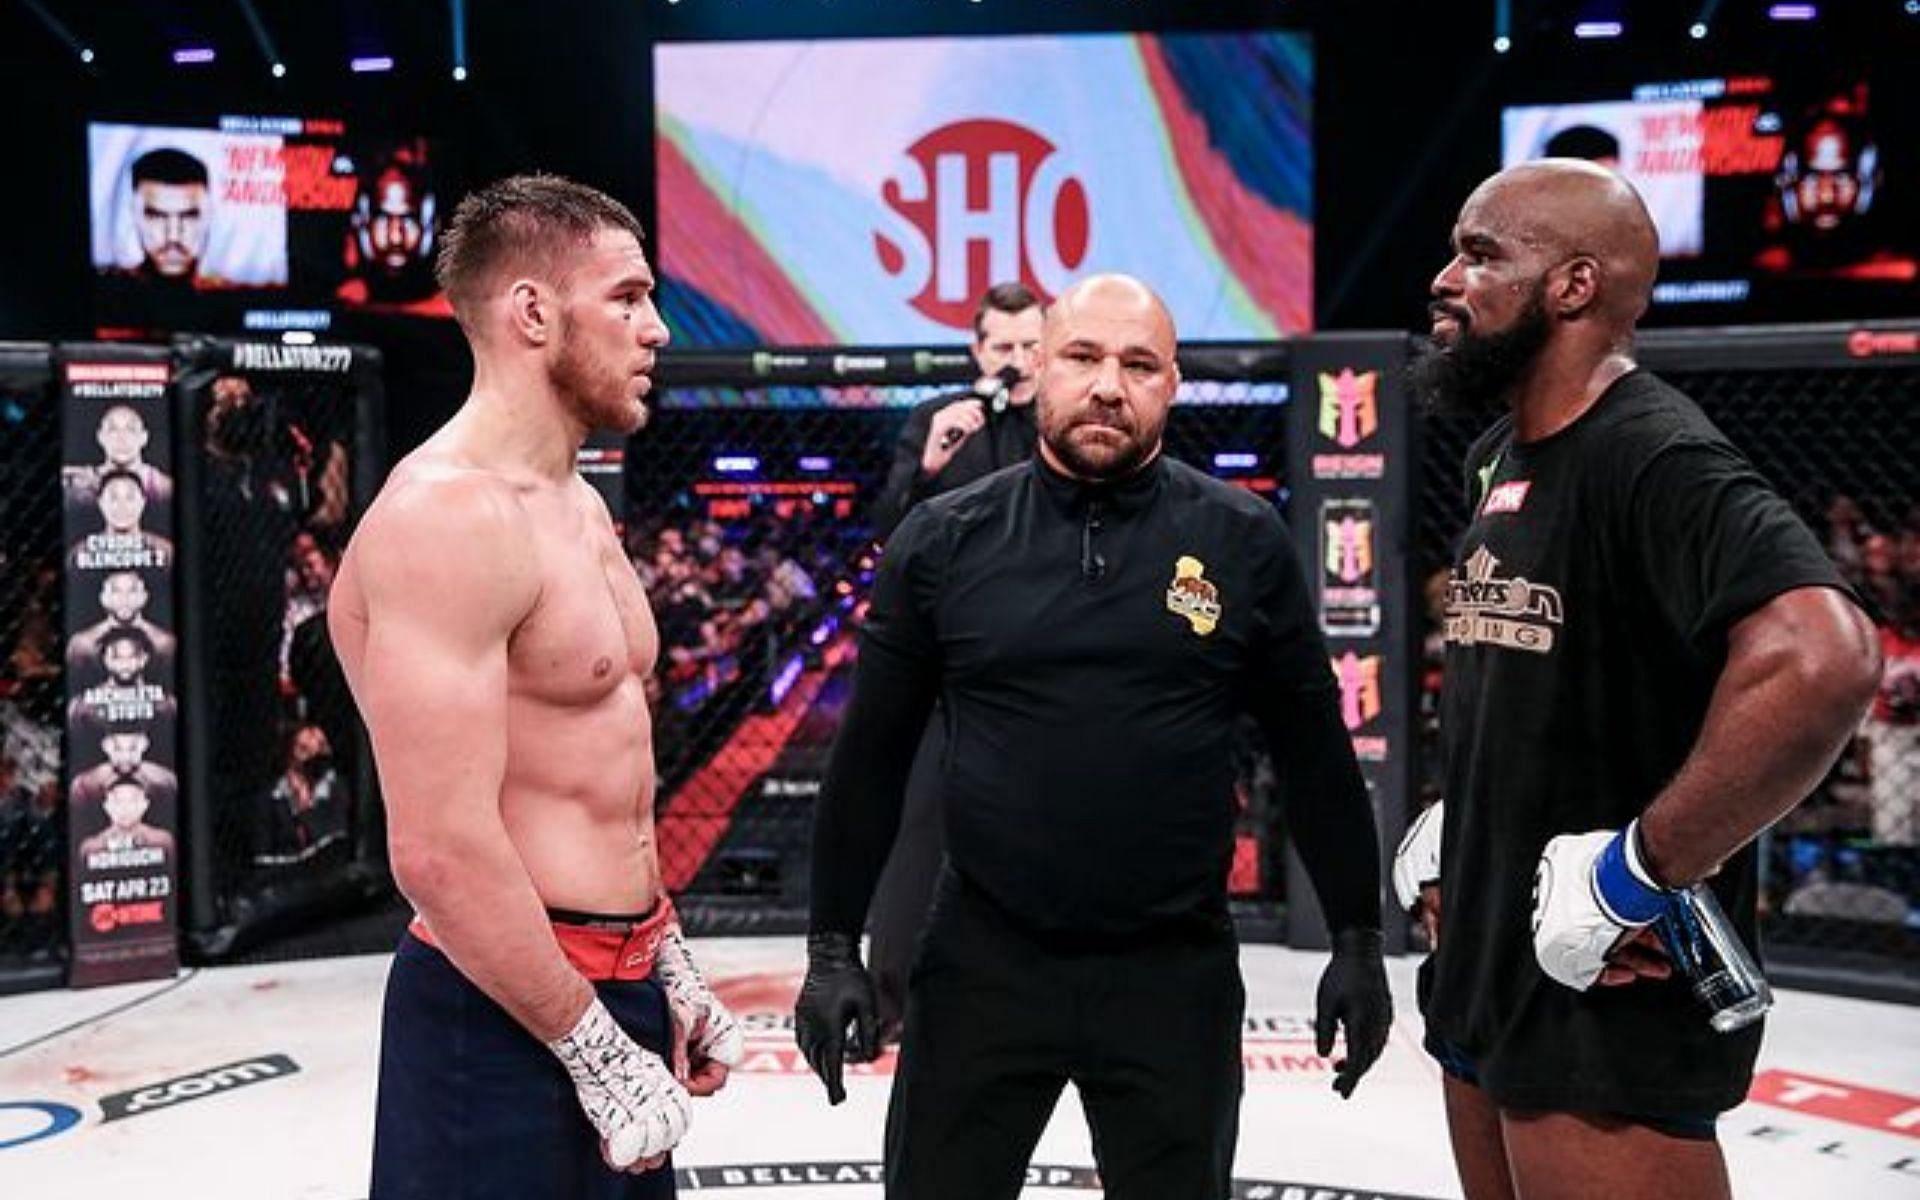 The Light heavyweight Grand Prix finals ended in a no-contest between Vadim Nemkov (left) and Corey Anderson (right).